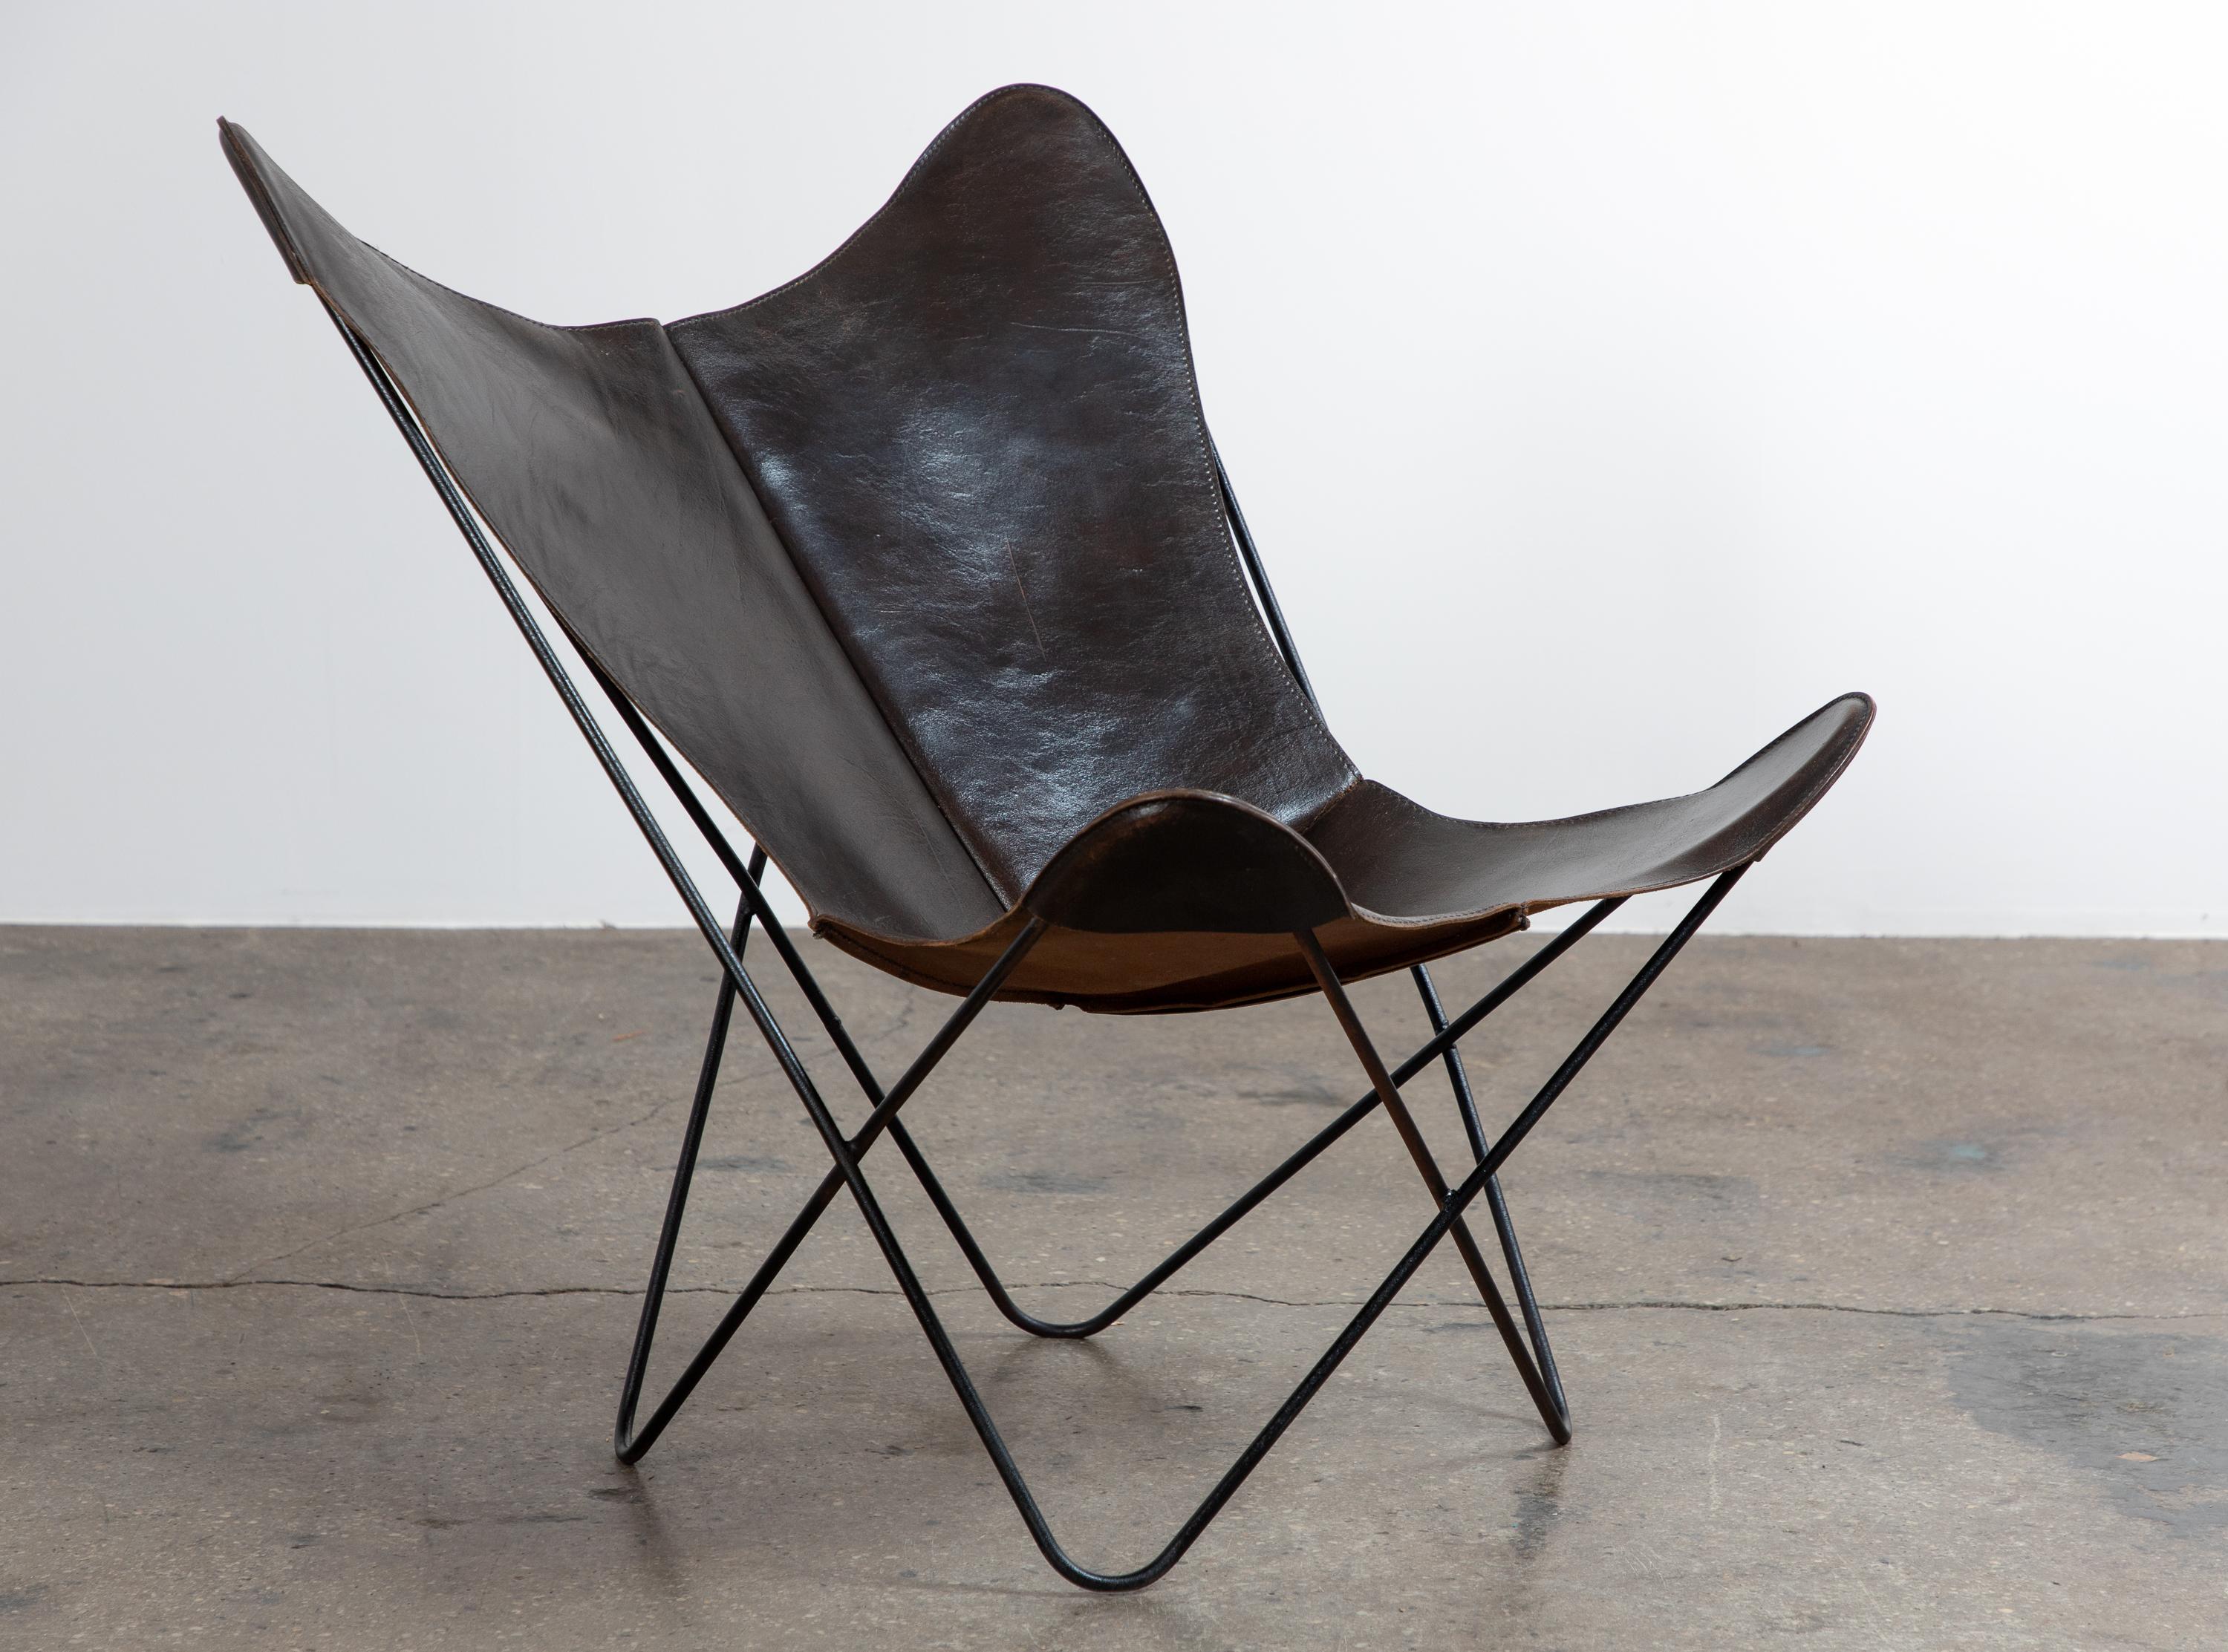 Welded Original Deep Brown Leather Hardoy Butterfly Chair, Issued by Knoll, 1950s For Sale